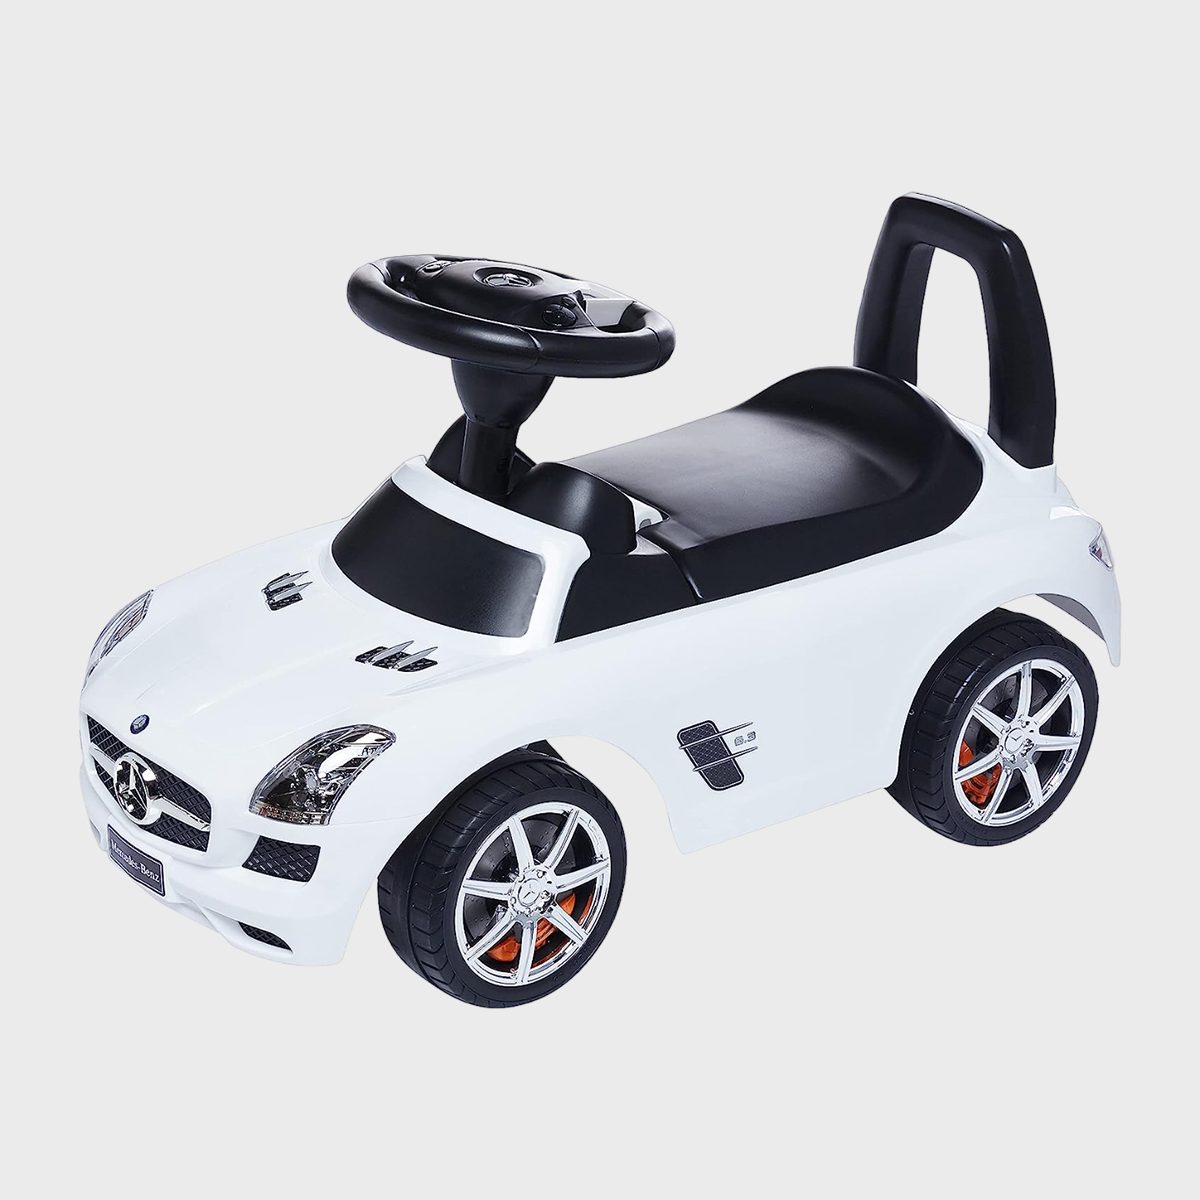 <p>Girls on the go can zip around in style with this <a href="https://www.amazon.com/Best-Ride-Cars-Mercedes-Benz/dp/B00JBYNFL2" rel="noopener noreferrer">mini Mercedes car</a>. The seat lifts up so they can take their most important toys with them wherever they go, and the steering wheel plays music and horn sounds. This <a href="https://www.rd.com/list/gifts-for-kids/">gift for kids</a> is just too cute!</p> <p class="listicle-page__cta-button-shop"><a class="shop-btn" href="https://www.amazon.com/Best-Ride-Cars-Mercedes-Benz/dp/B00JBYNFL2/">Shop Now</a></p>